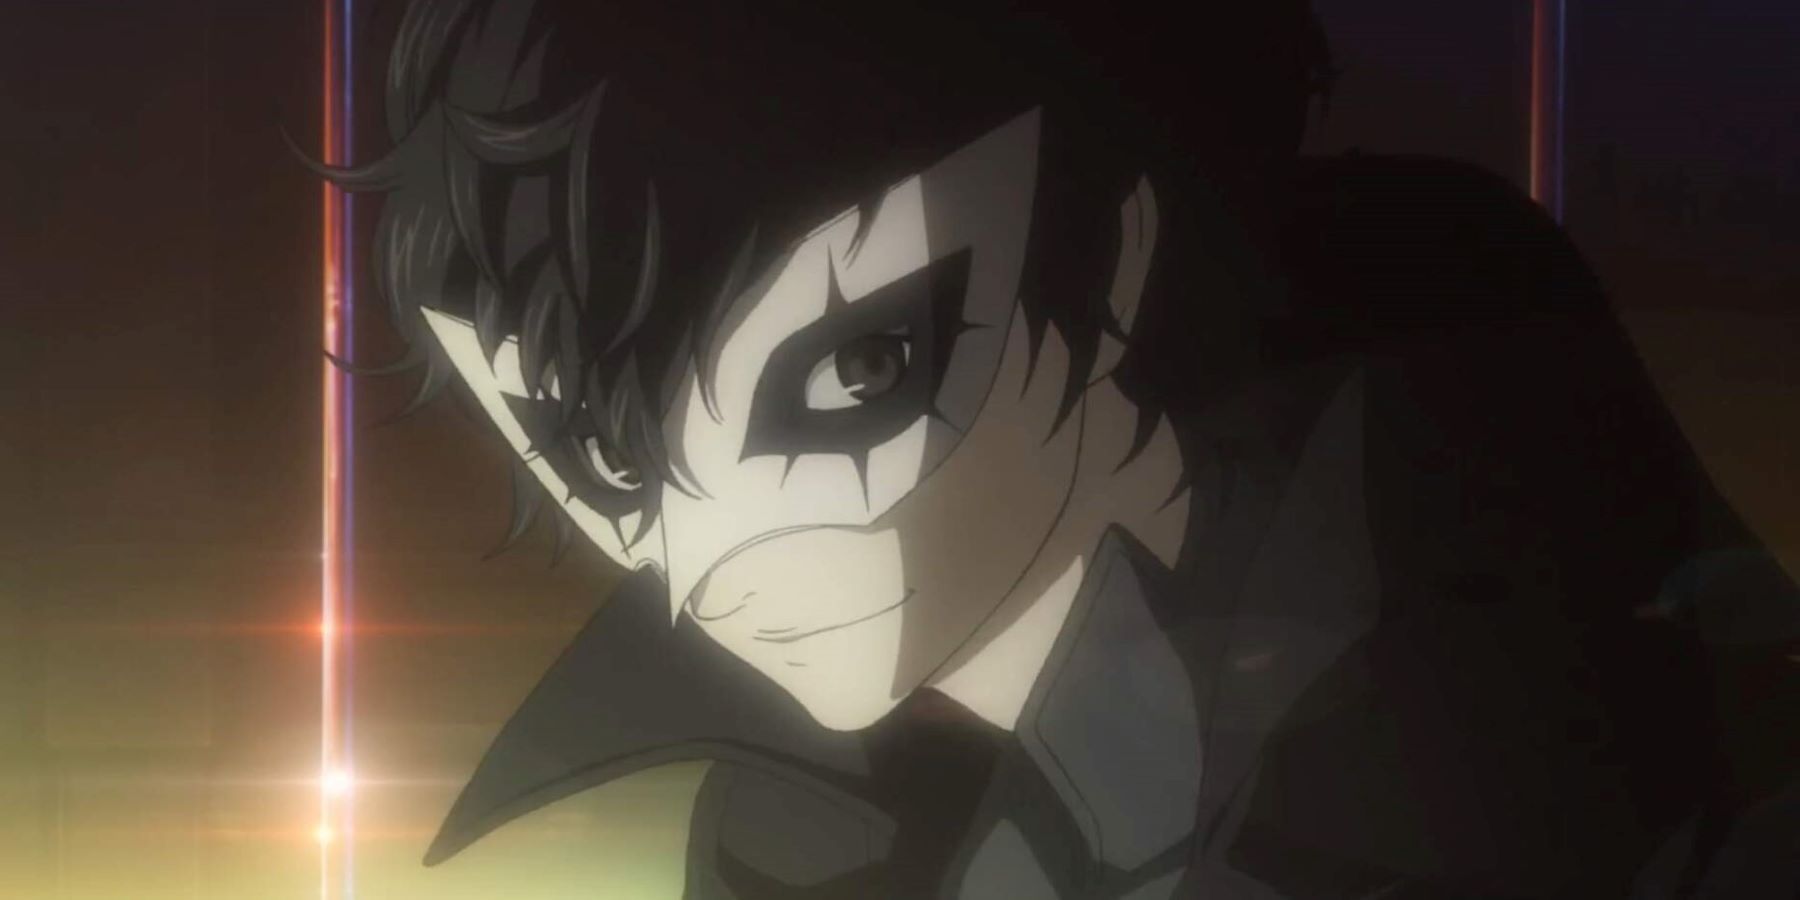 A close up of Joker escaping Sae's Palace in the Persona 5 opening cutscene